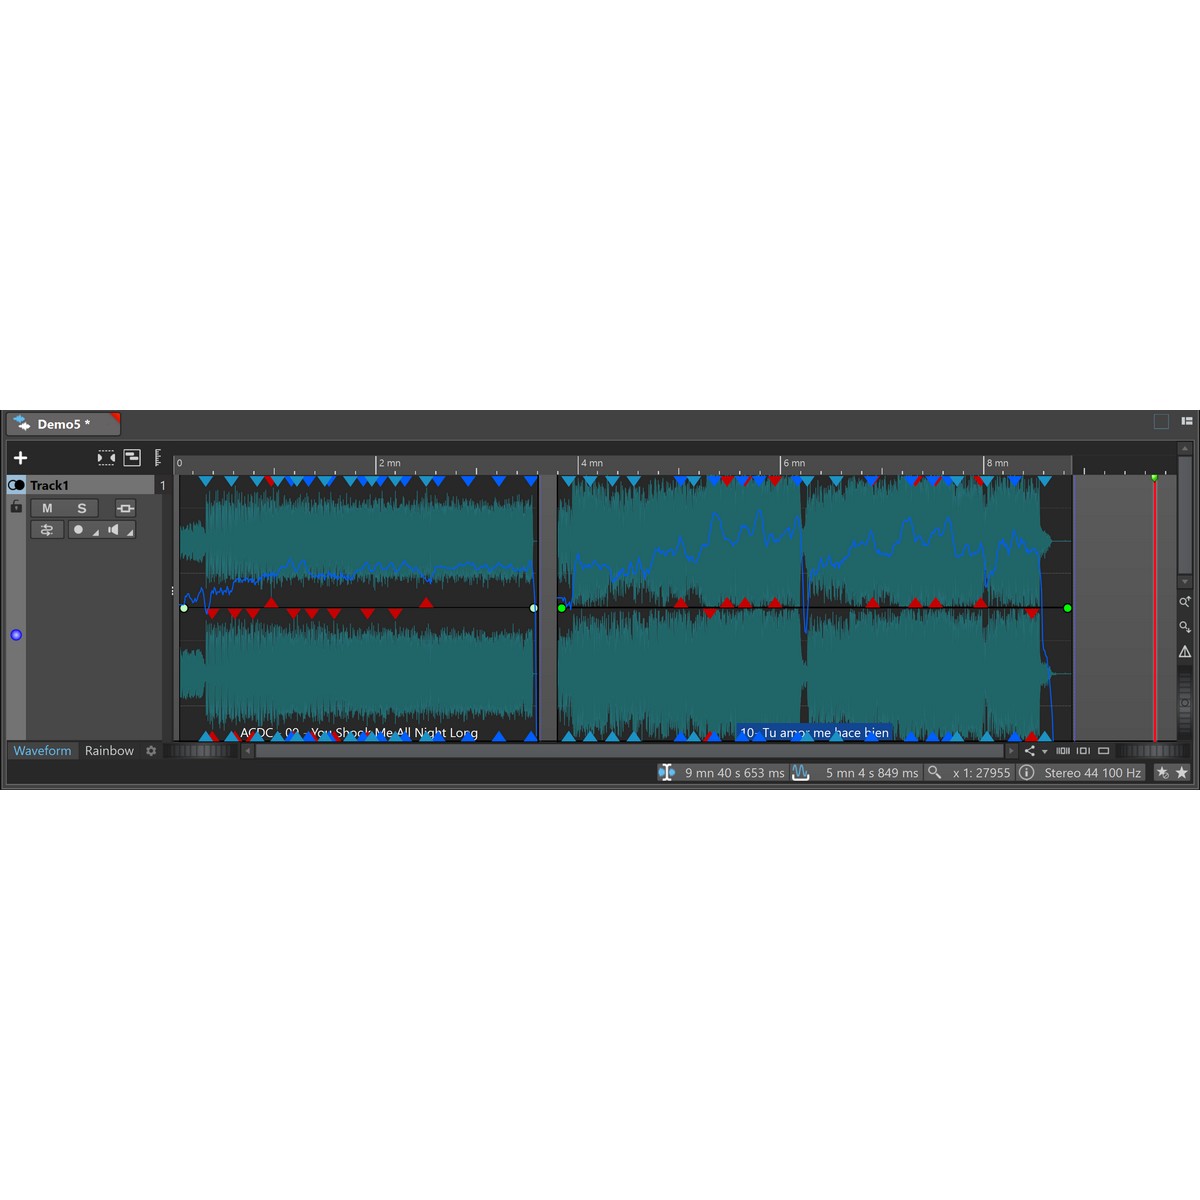 Steinberg WaveLab Pro 12 Audio Mastering Music Production Software, School Site License Download